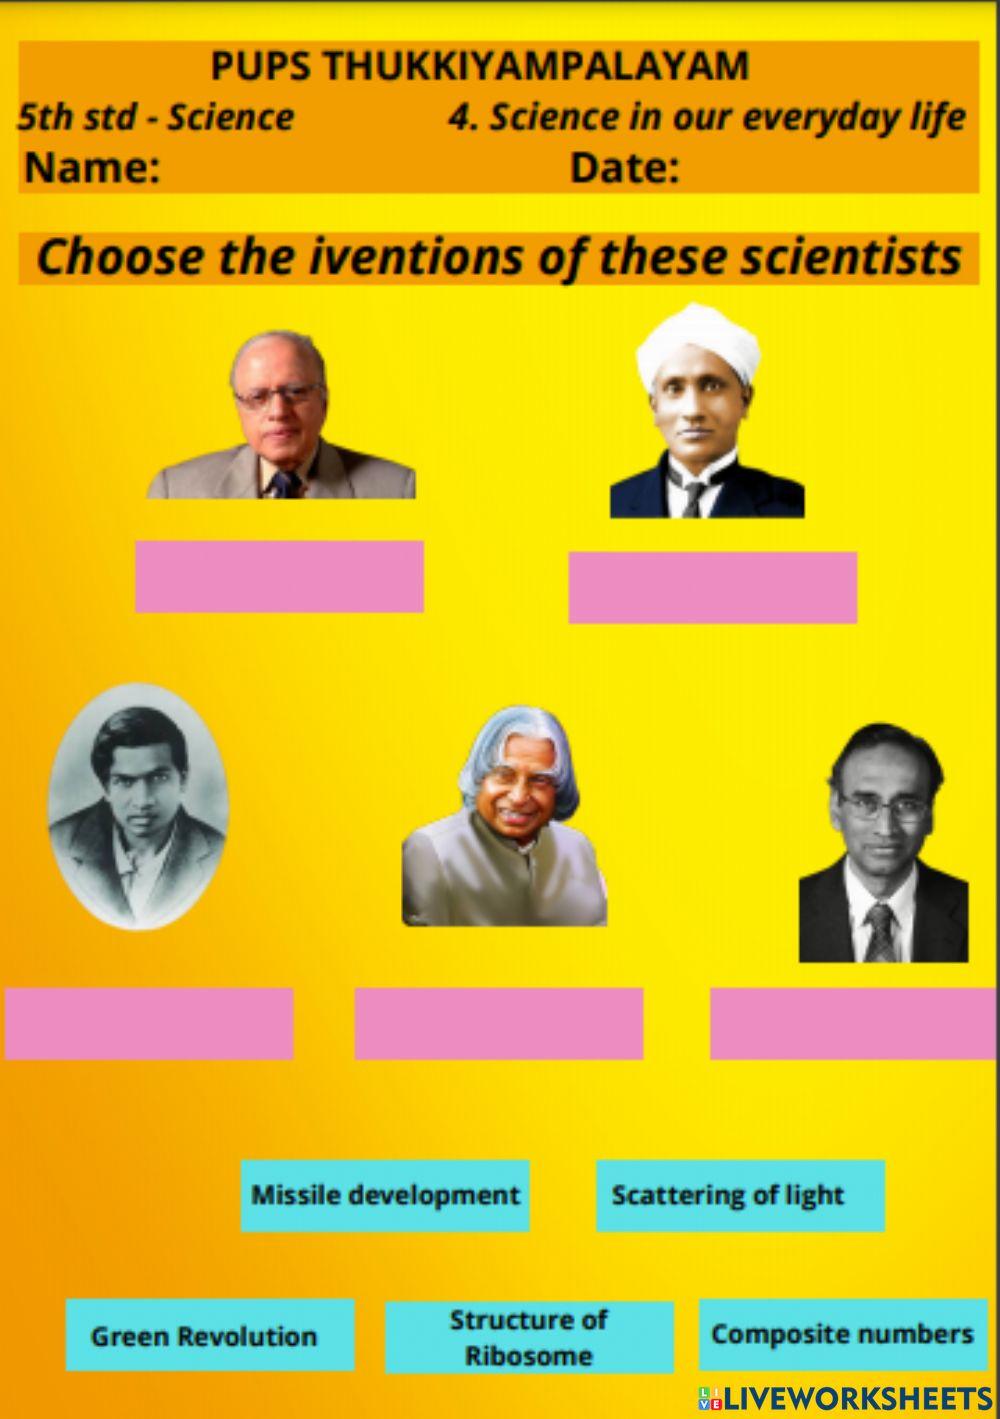 Scientists and their inventions